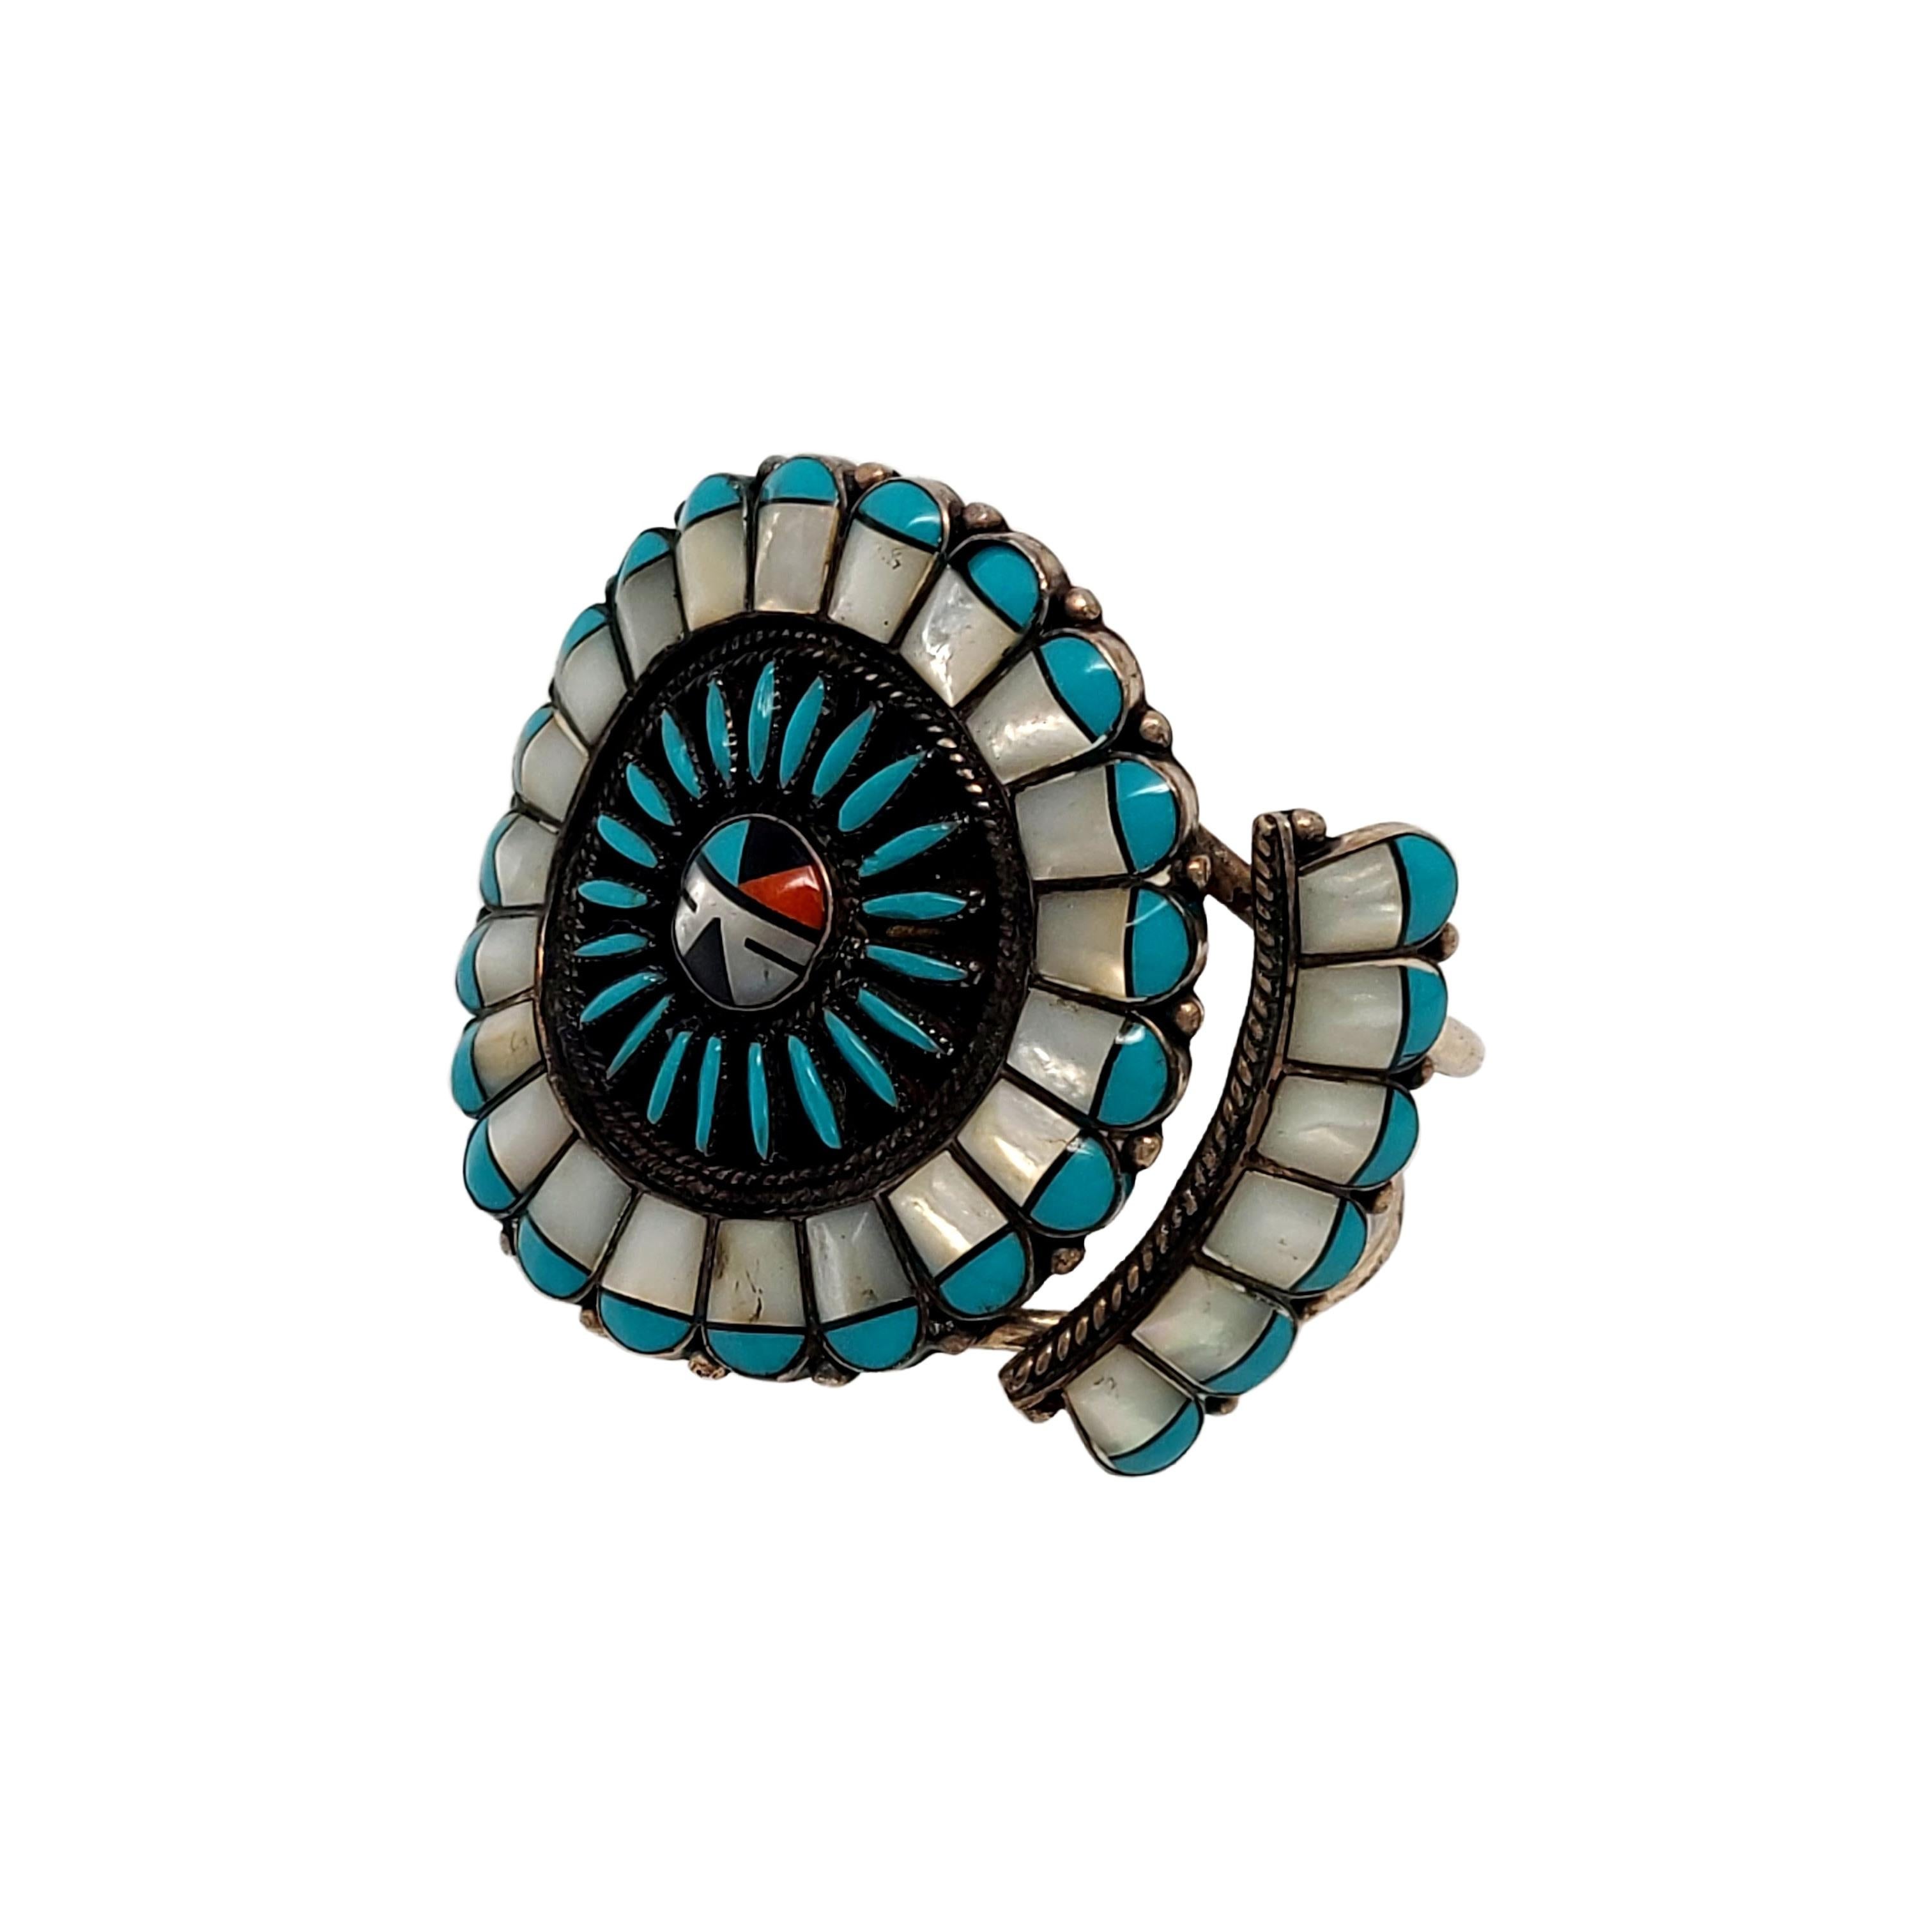 Sterling silver cuff bracelet by Native American artisan featuring needlepoint and cluster work.

Beautiful  small, round inlaid mosaic of onyx, mother of pearl, turquoise and red coral in a bezel setting surrounded by a needlepoint turquoise stones